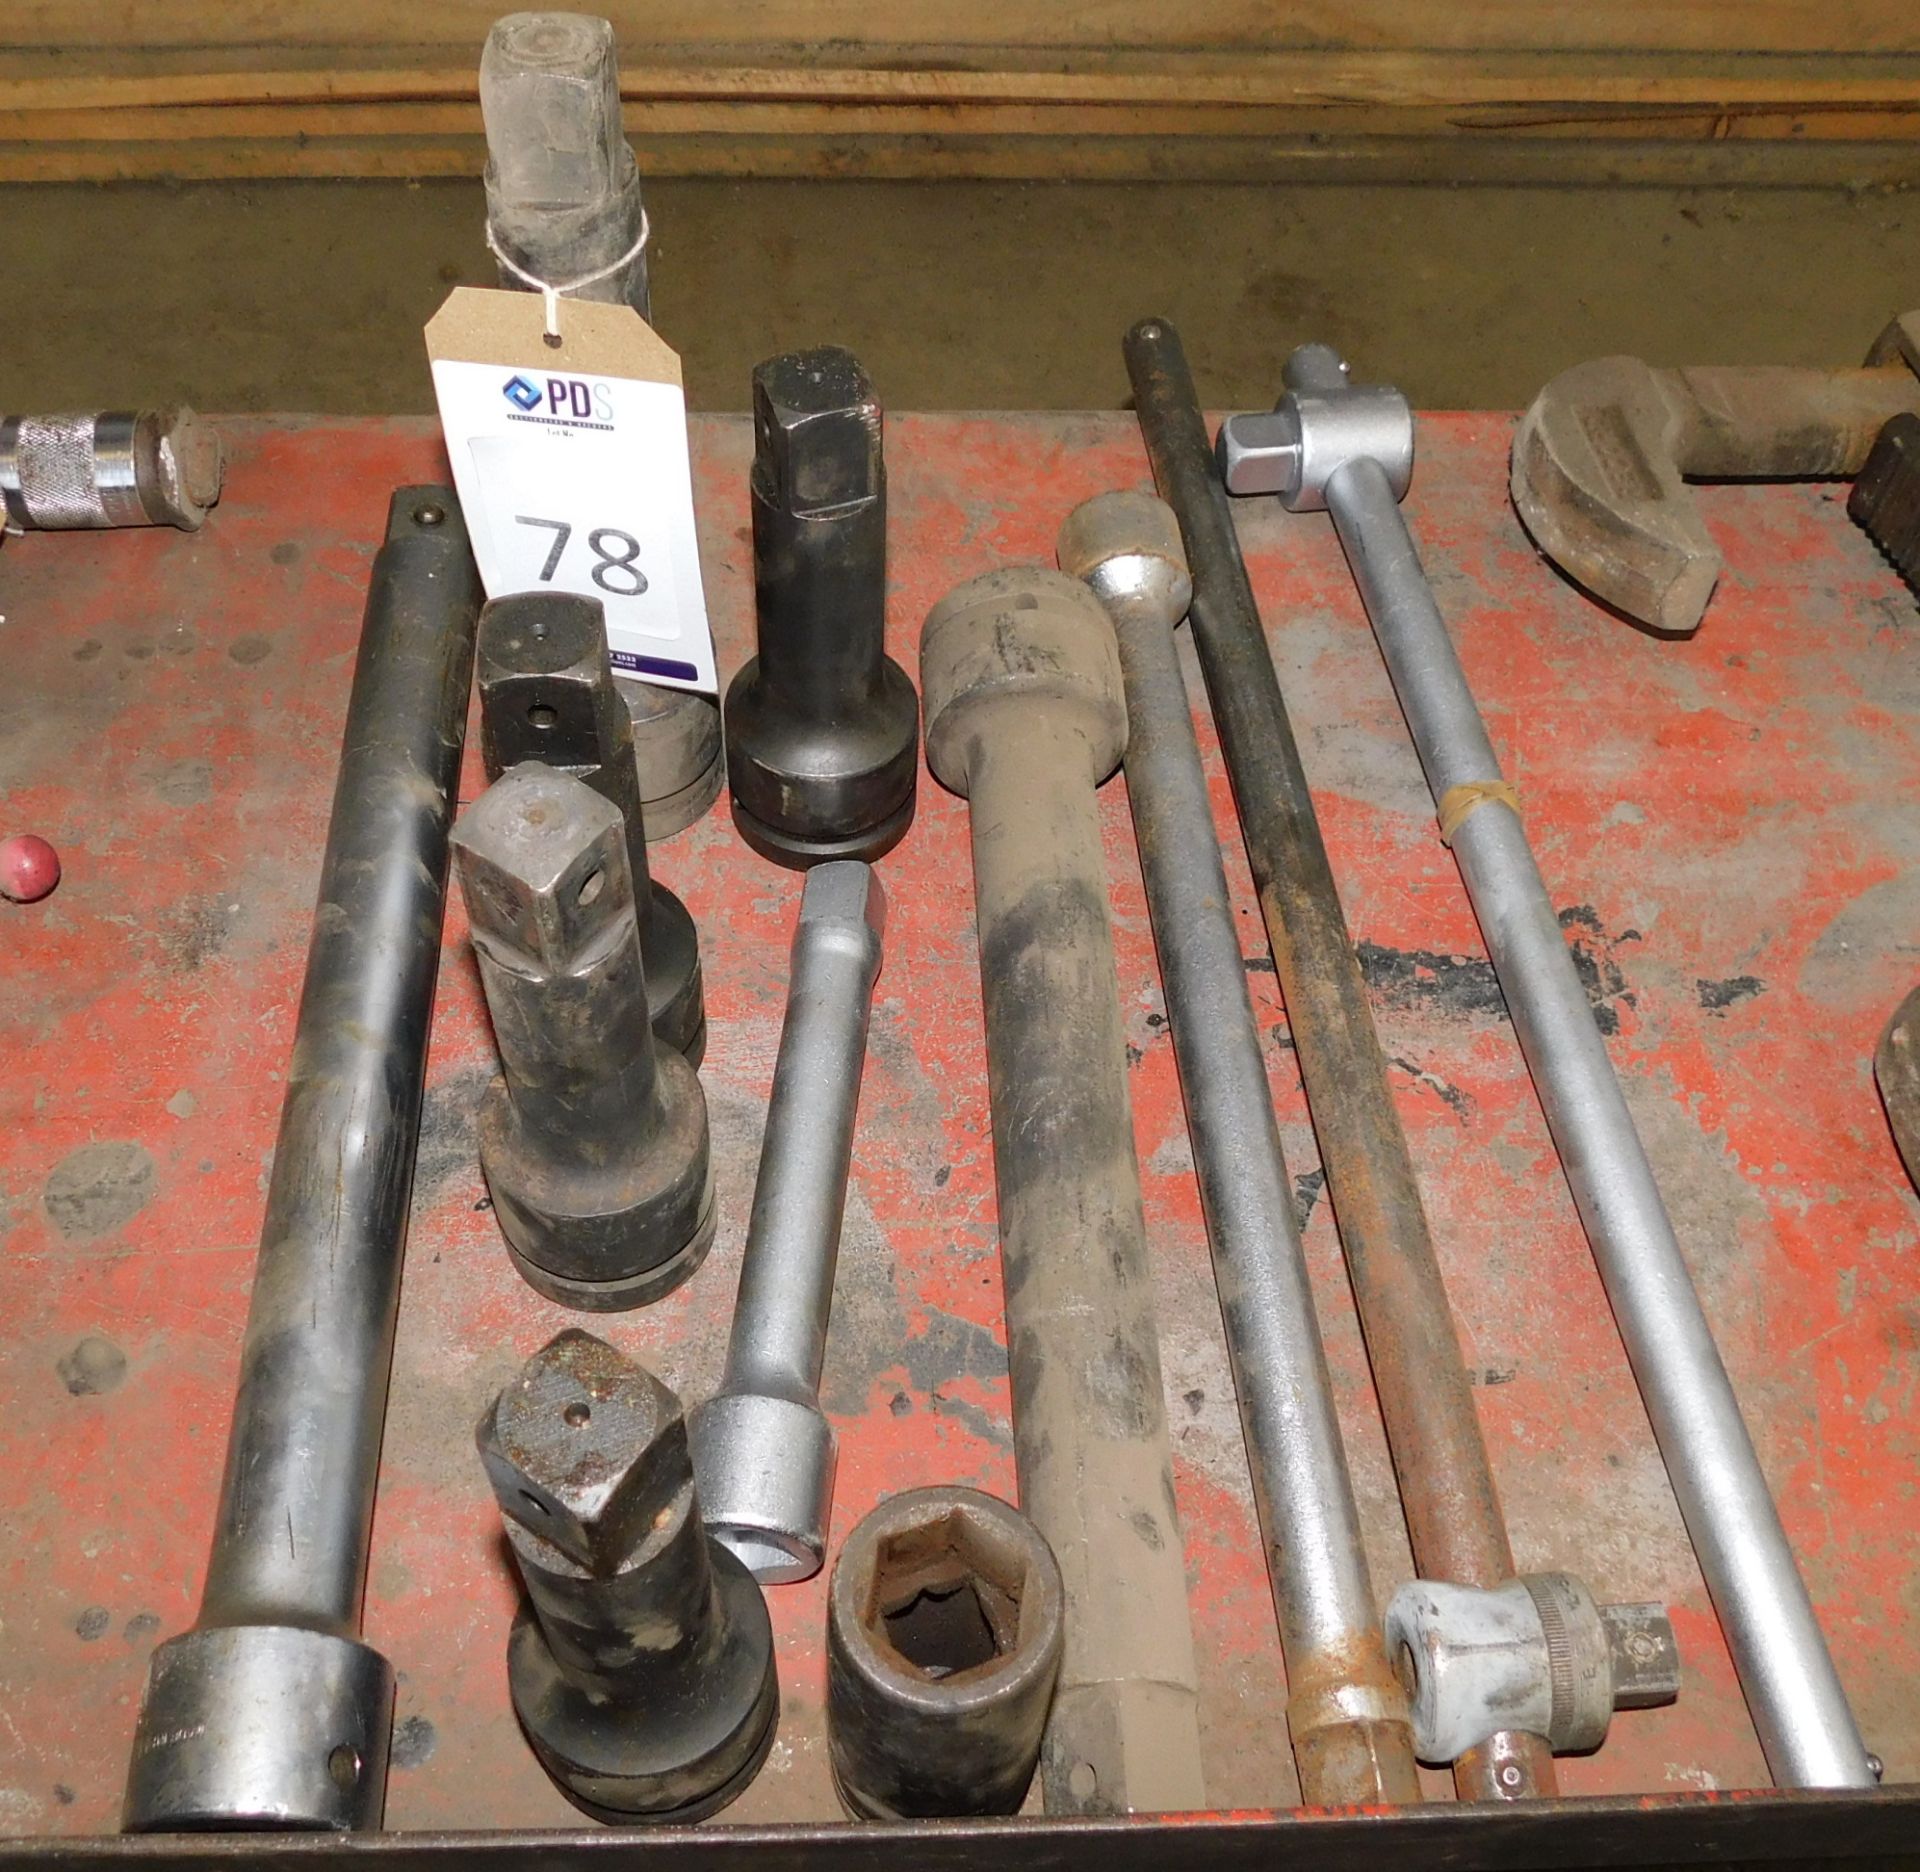 Quantity of Torque Wrench Attachments (Location: Bristol. Please Refer to General Notes)